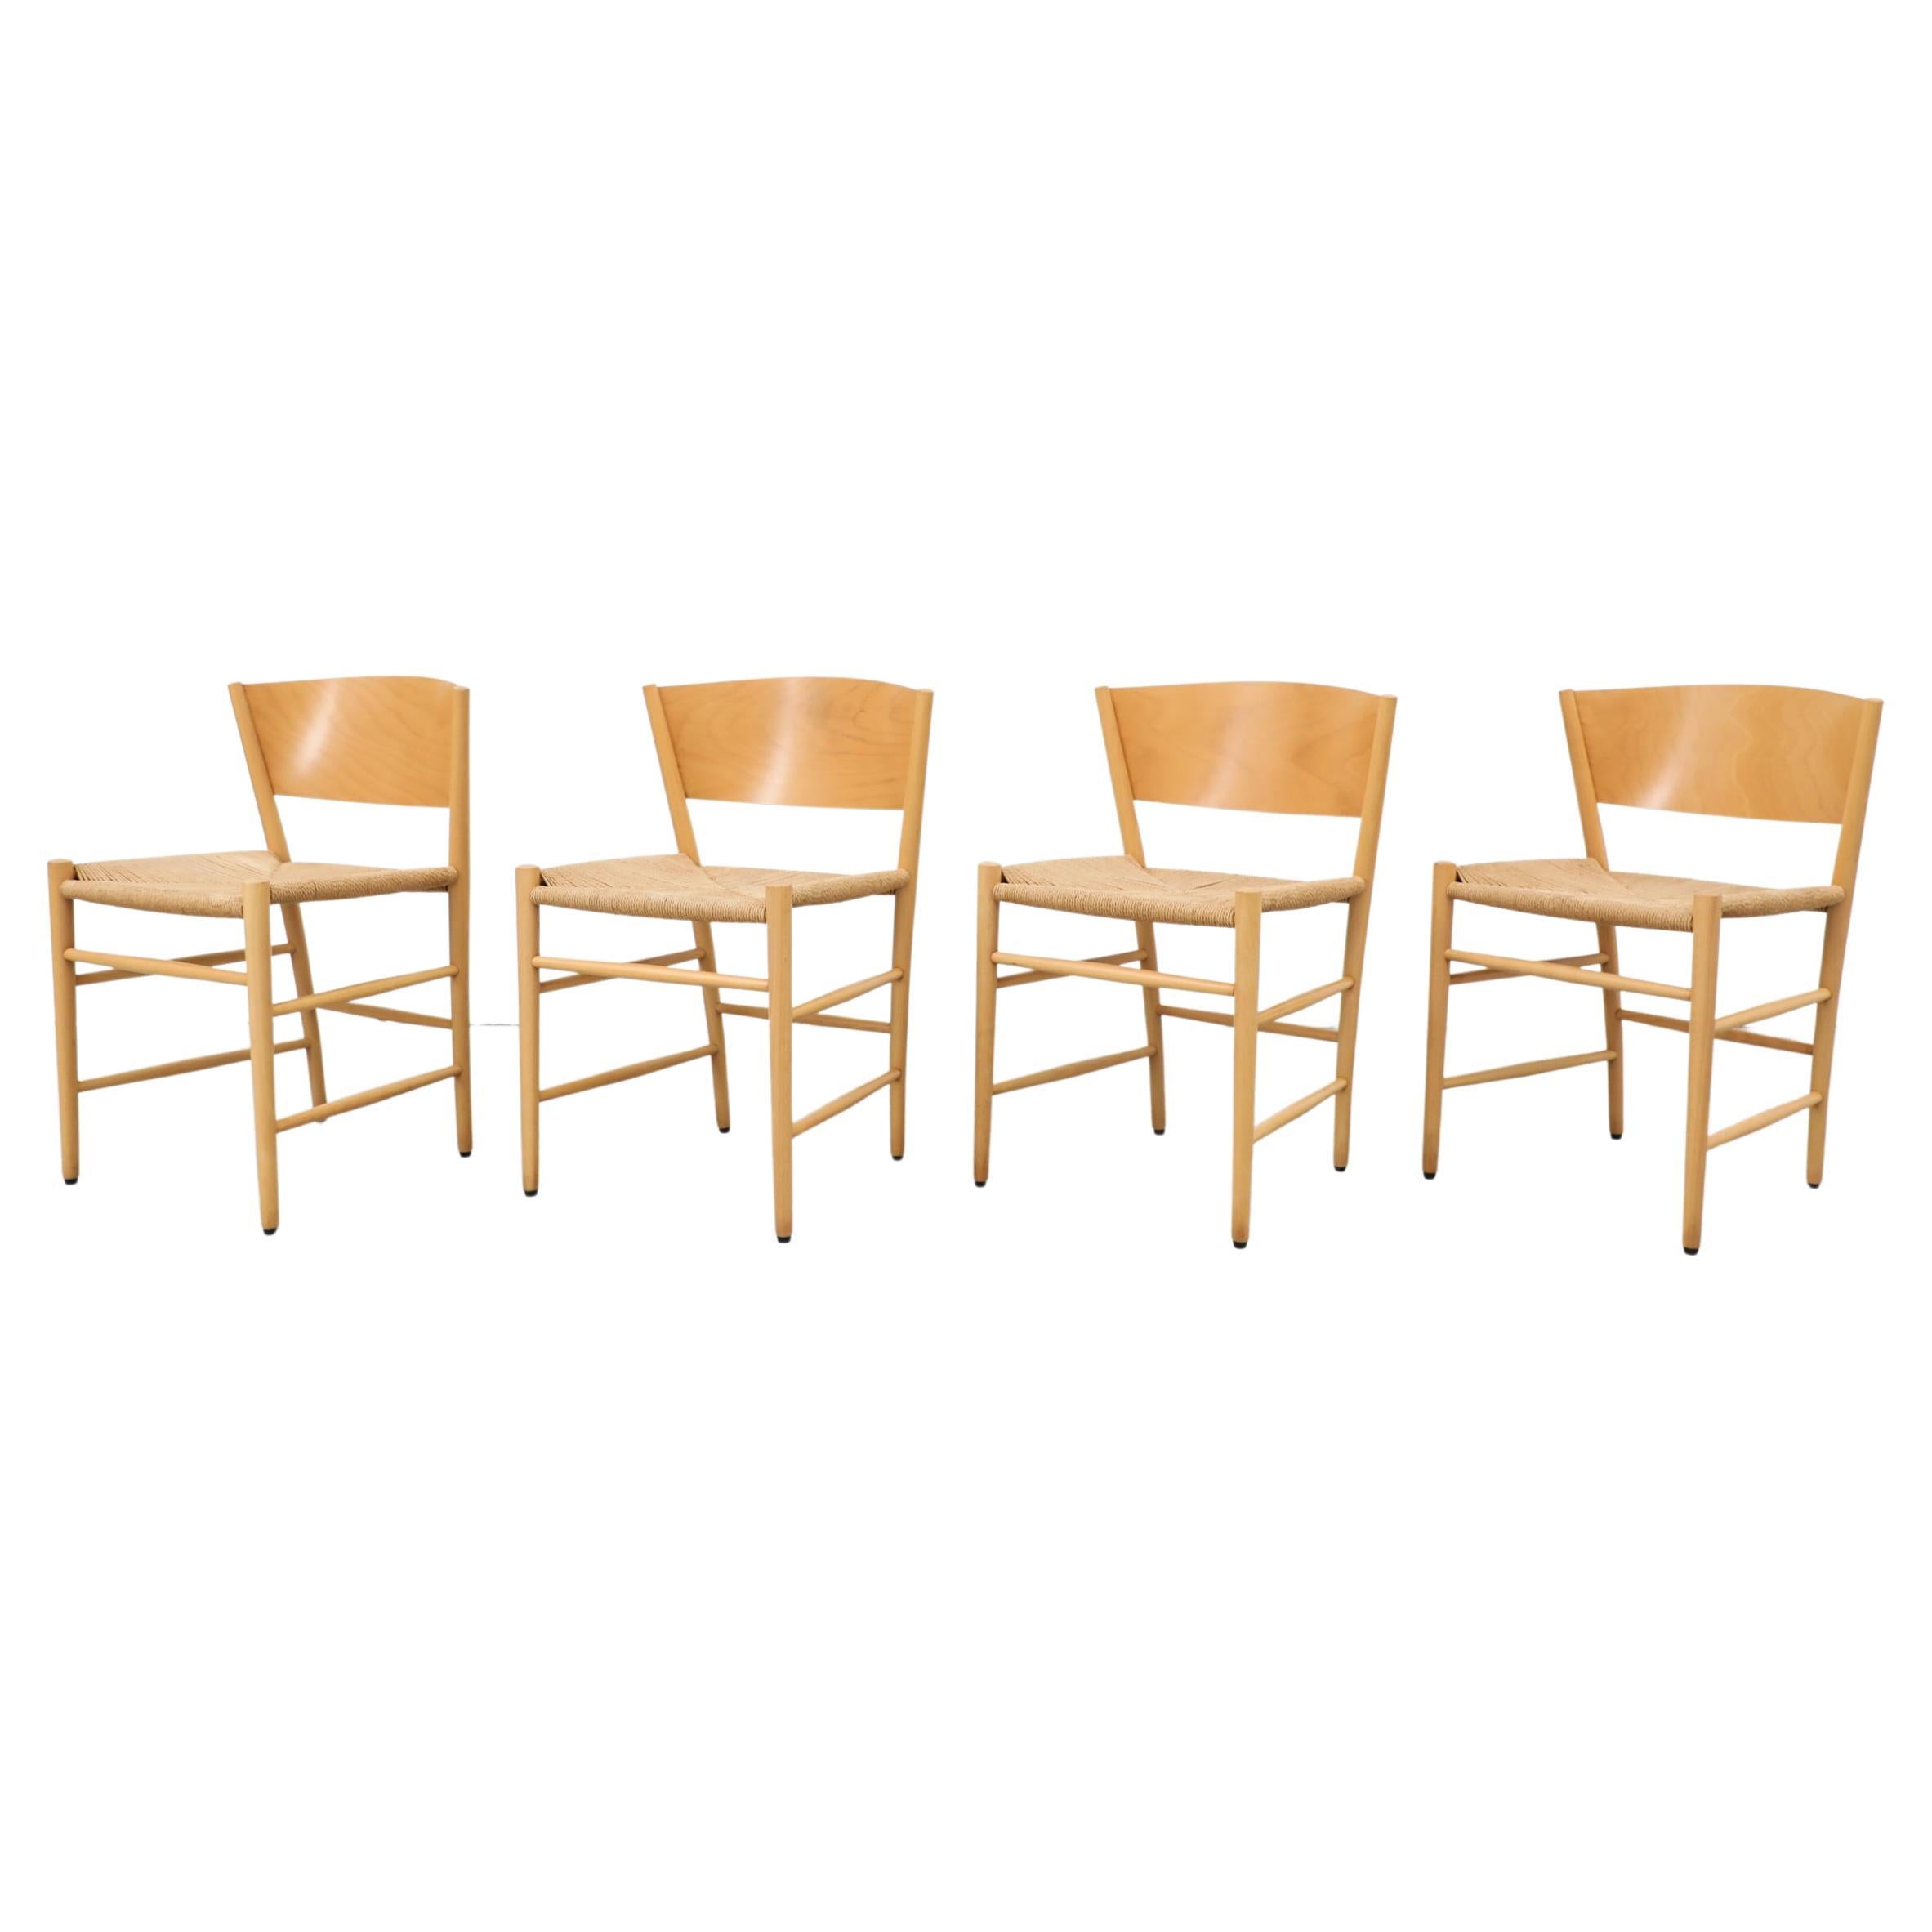 Set of 4 1990s Danish 'Jive' Chairs by Tom Stepp in Birch for Kvist Møbler